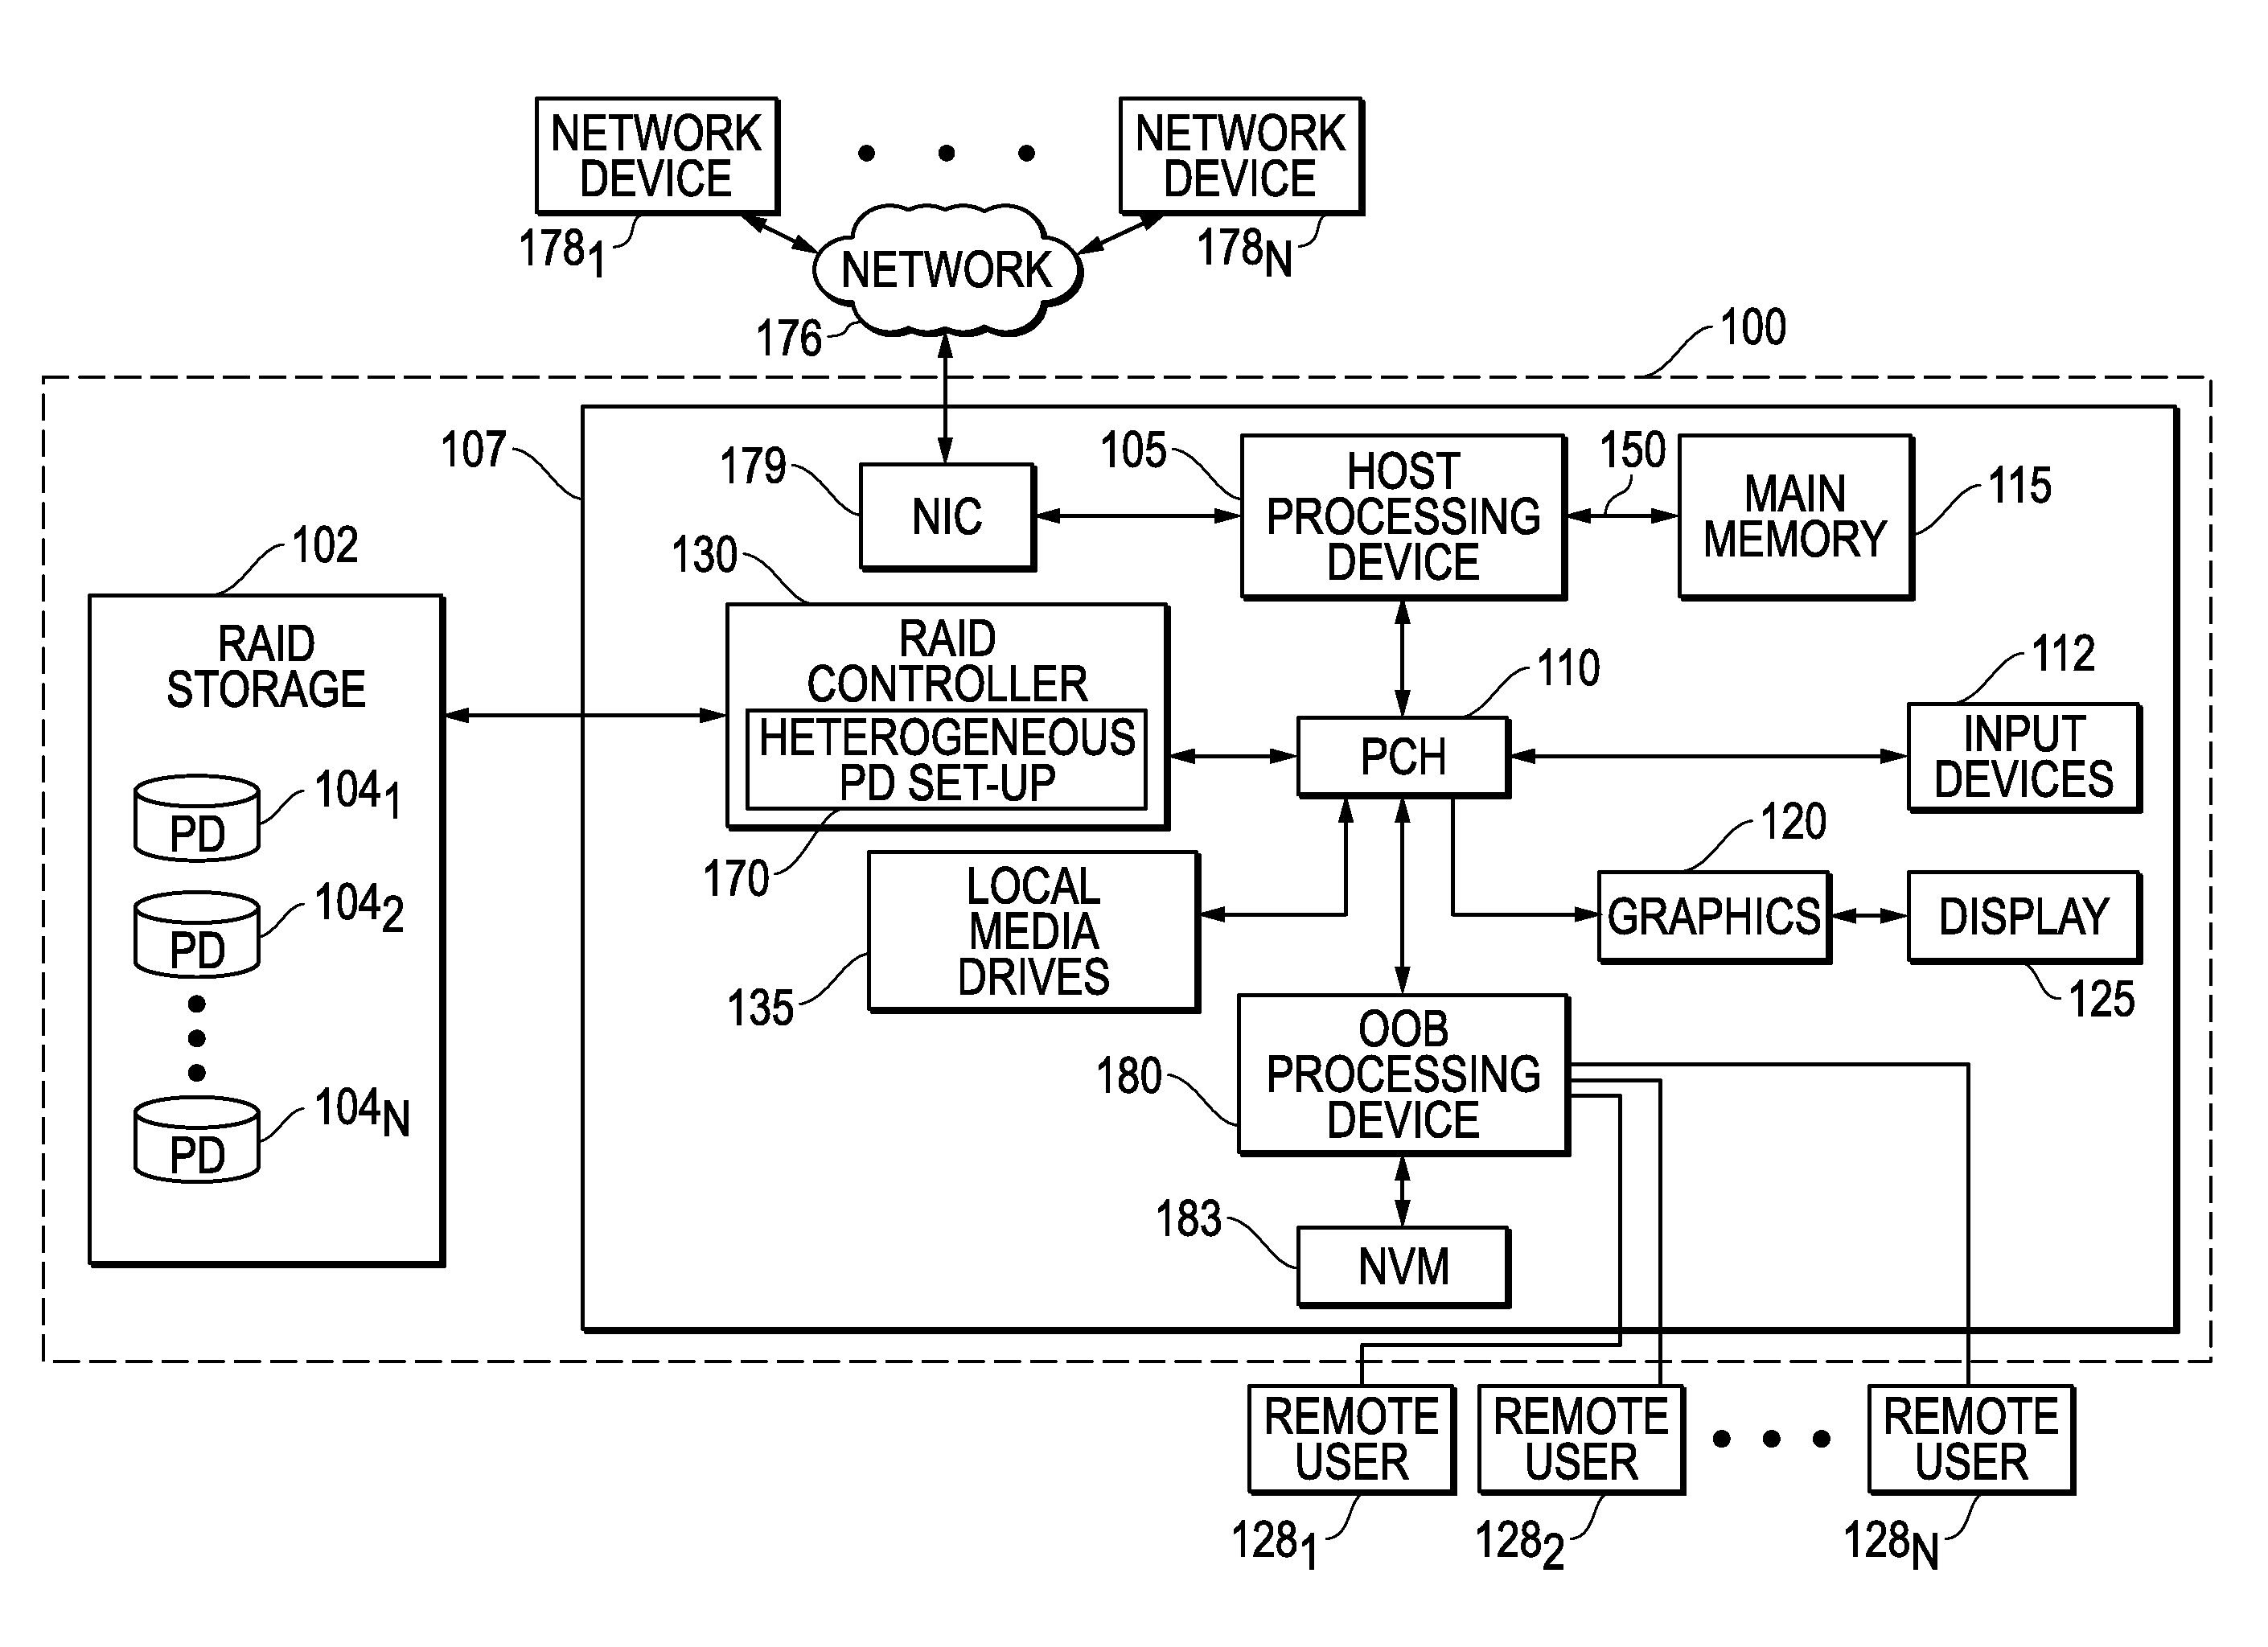 Systems And Methods For RAID Storage Configuration Using Hetereogenous Physical Disk (PD) Set Up